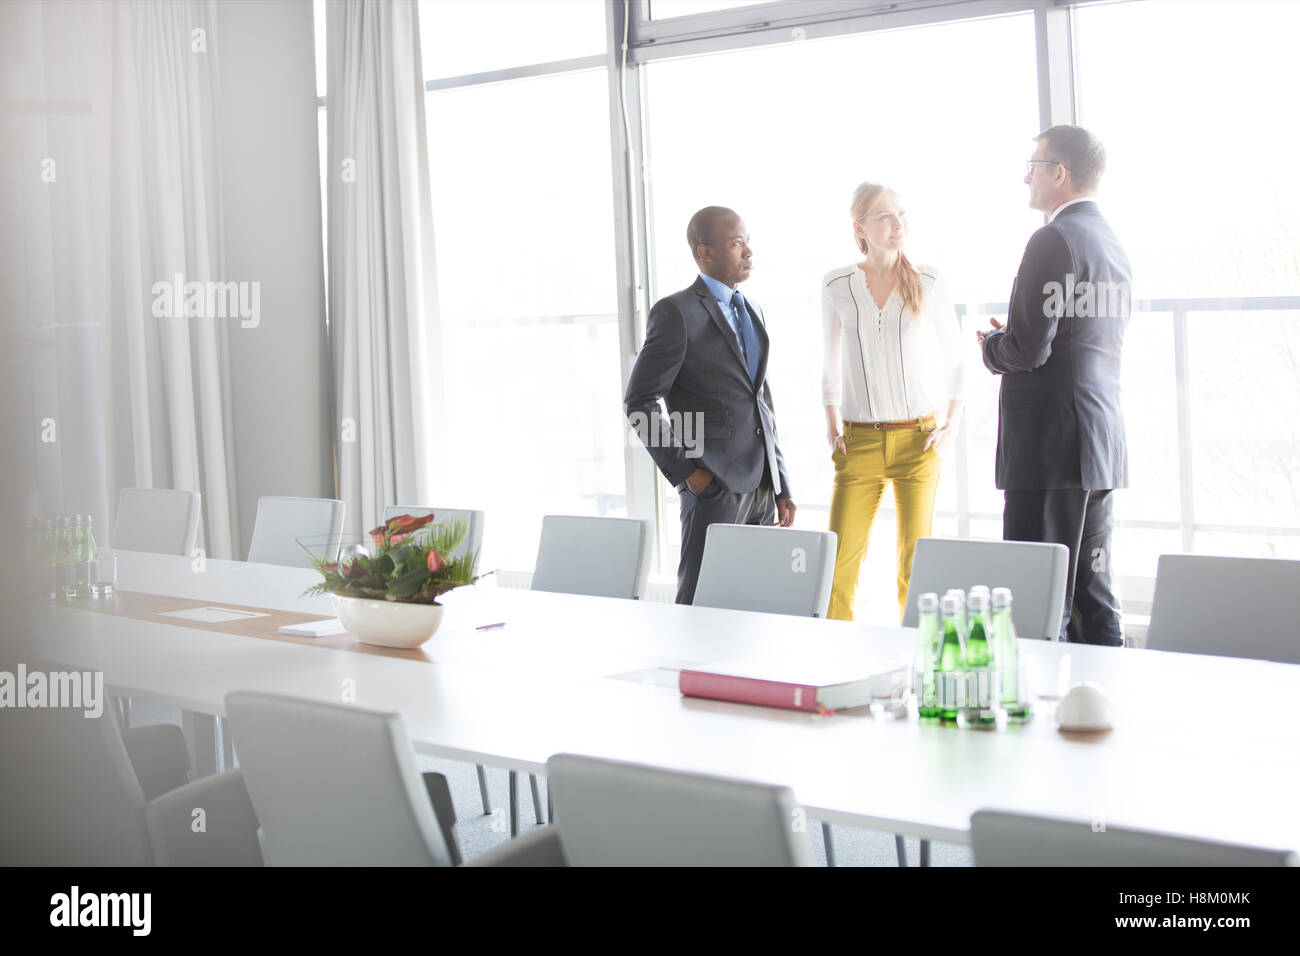 Business people talking while standing by conference table Banque D'Images